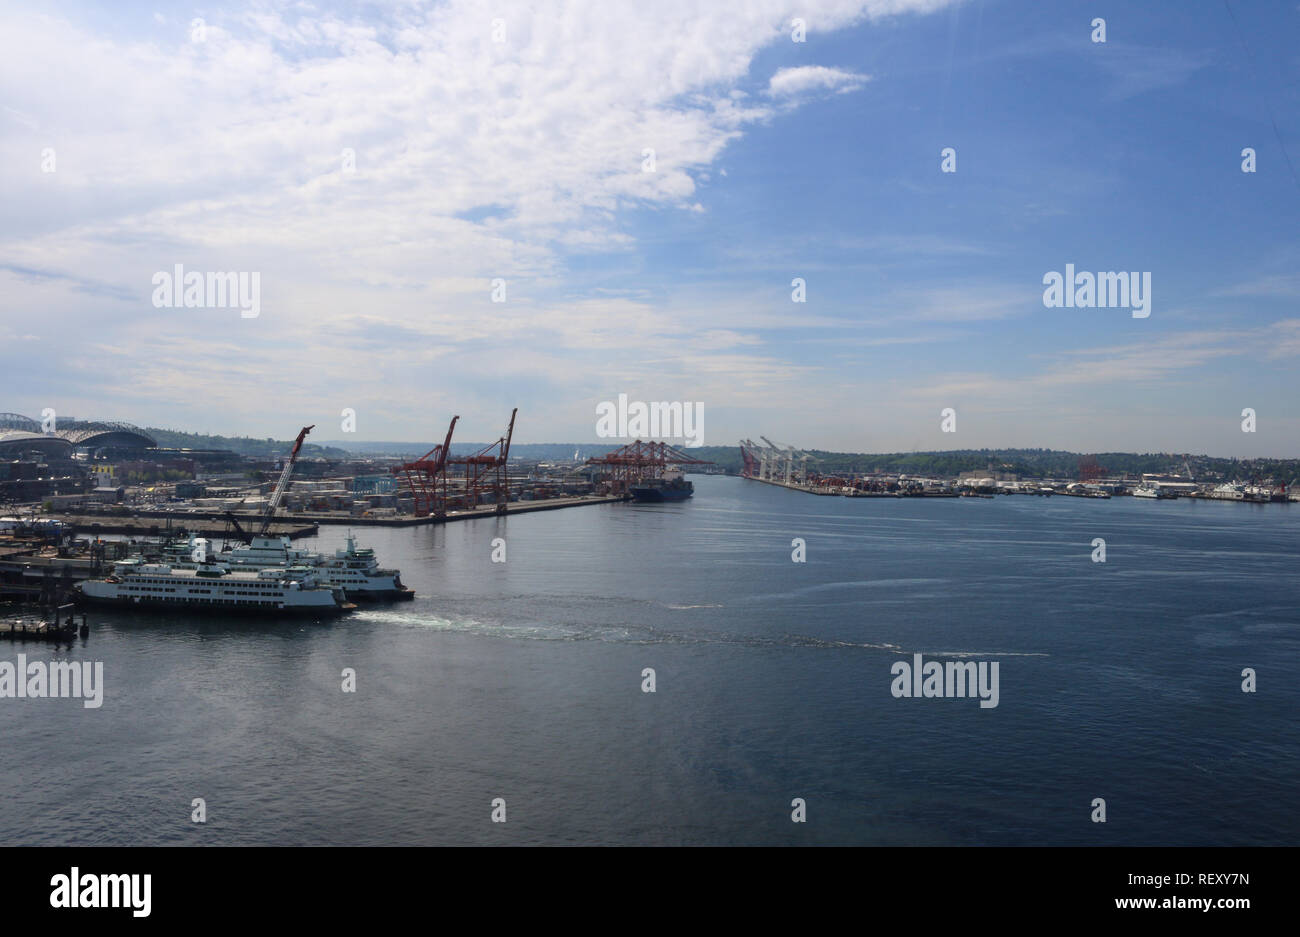 Seattle Puget Sound harbor marine landscape aerial view on a sunny partly cloudy day with two cruise ships docked and rows of ports in the background Stock Photo